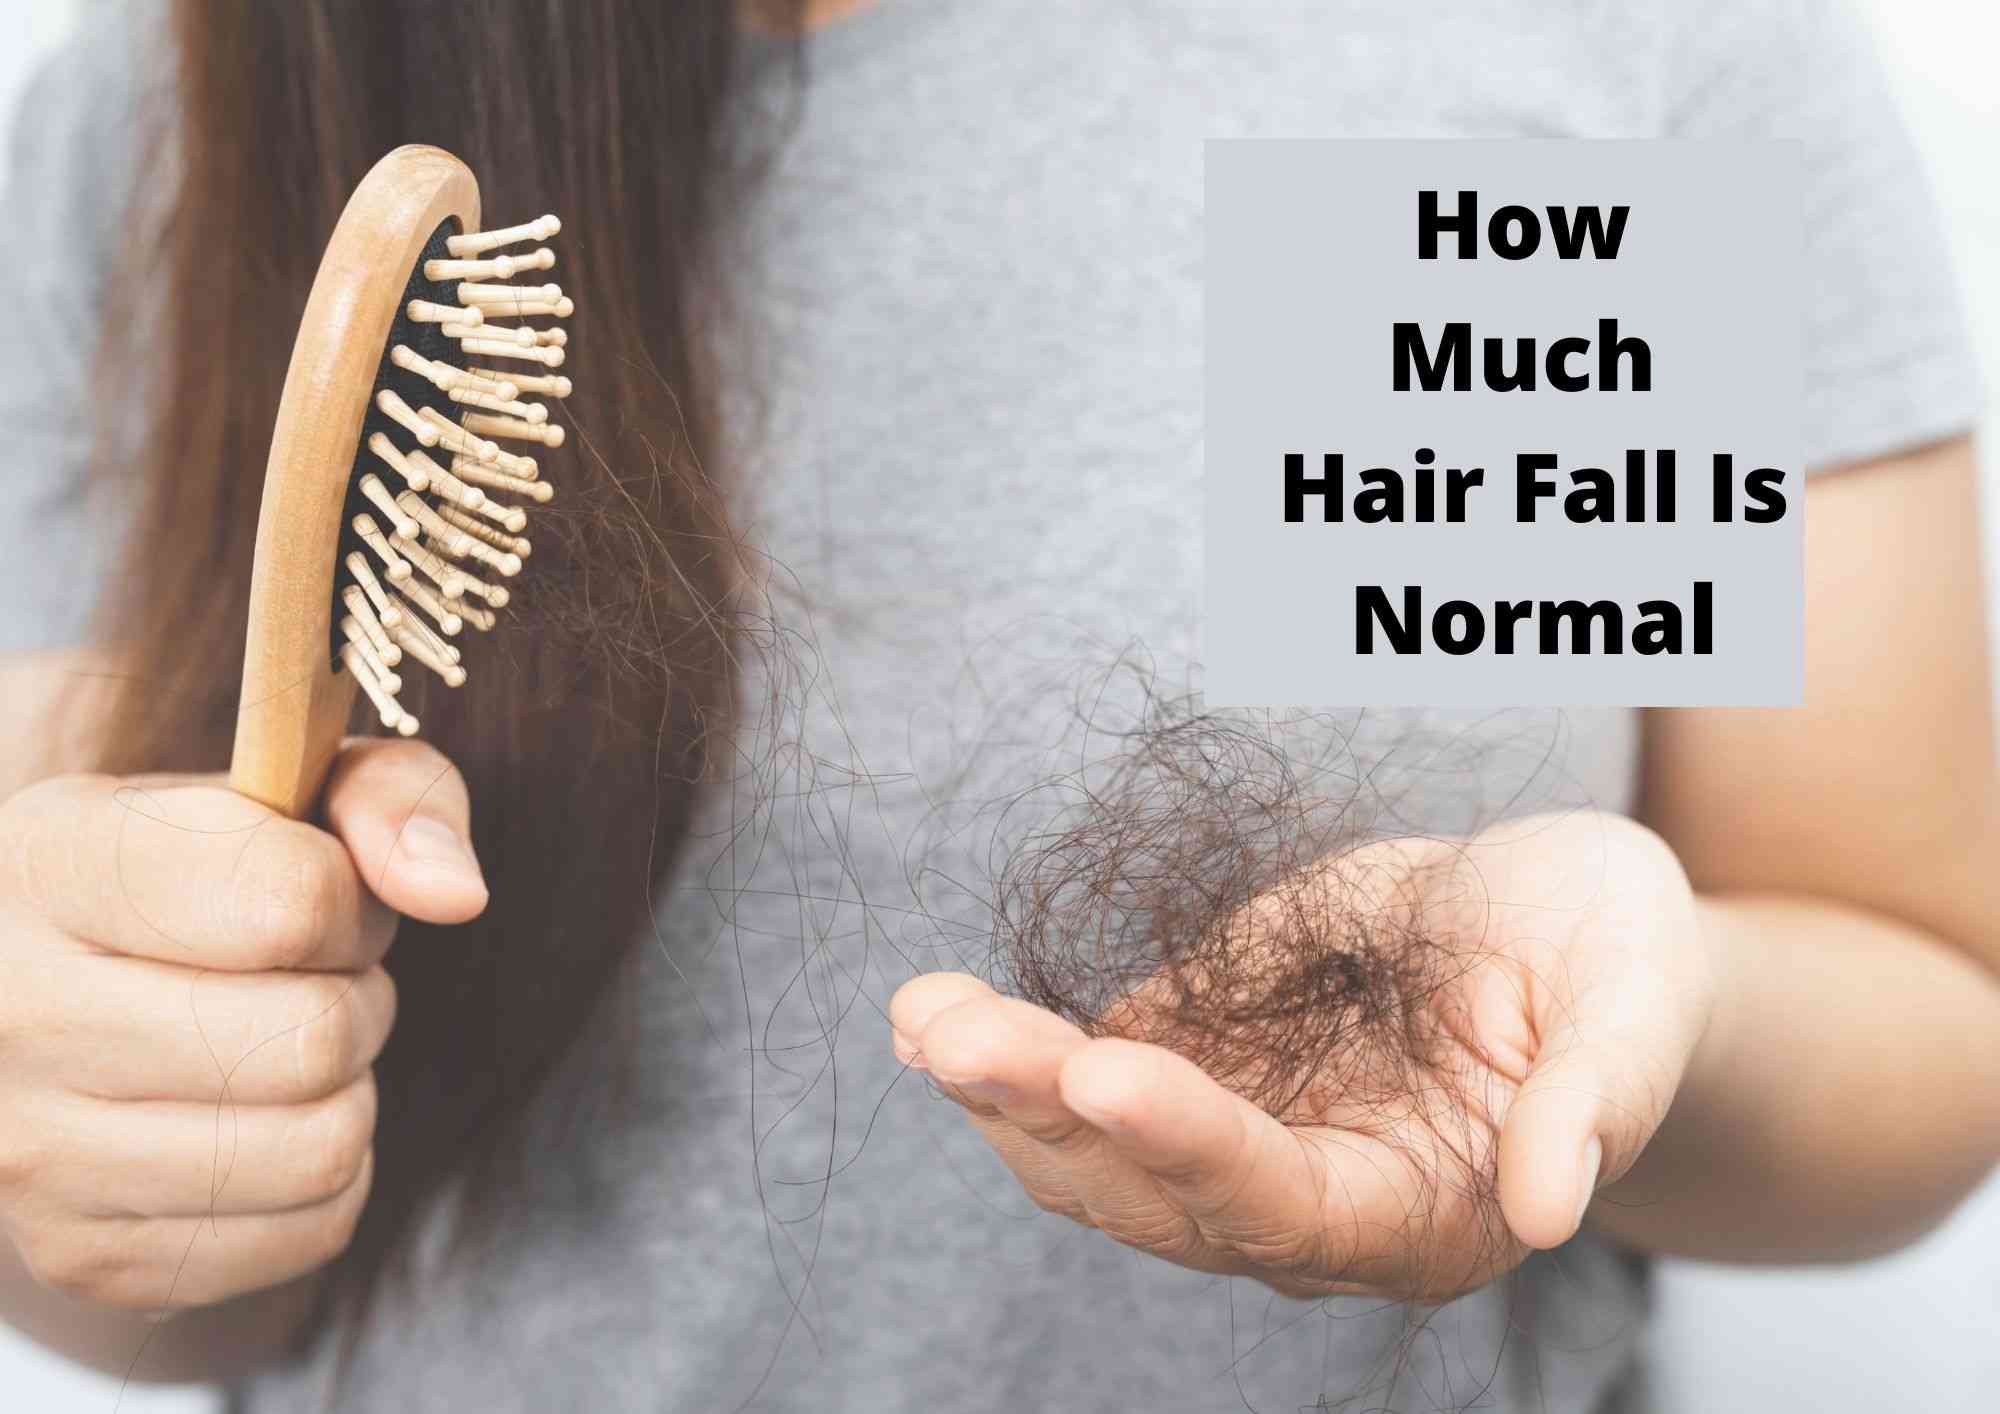 How Much Hair Fall Is Normal | When Does Hair Loss Become A Problem